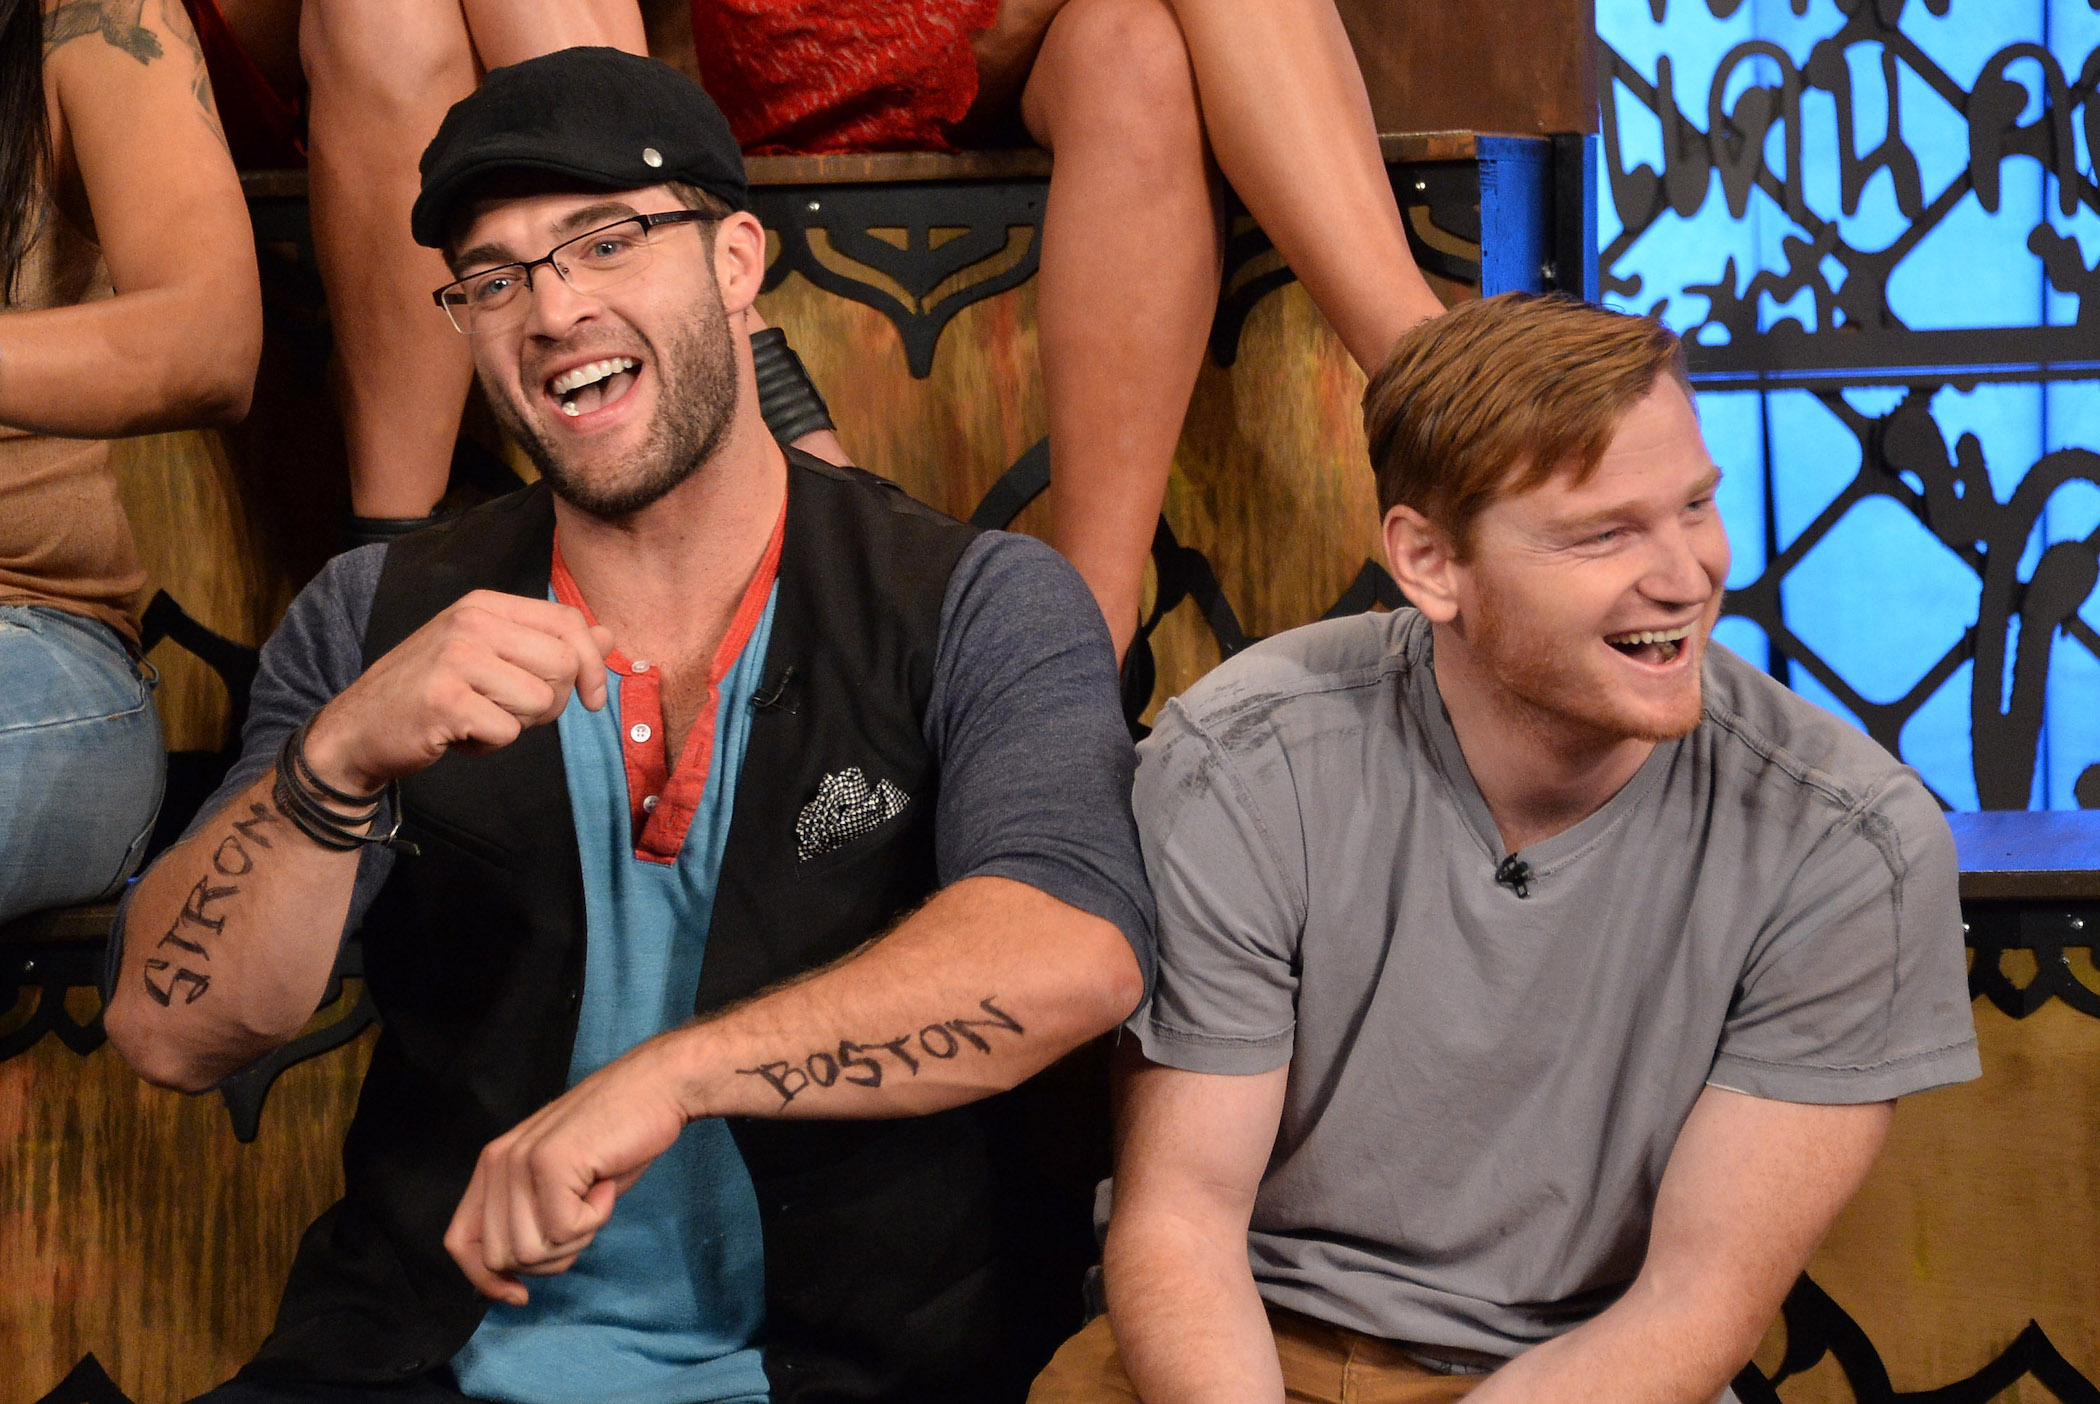 CT Tamburello and Wes Bergmann at MTV's 'The Challenge' reunion laughing while sitting next to each other